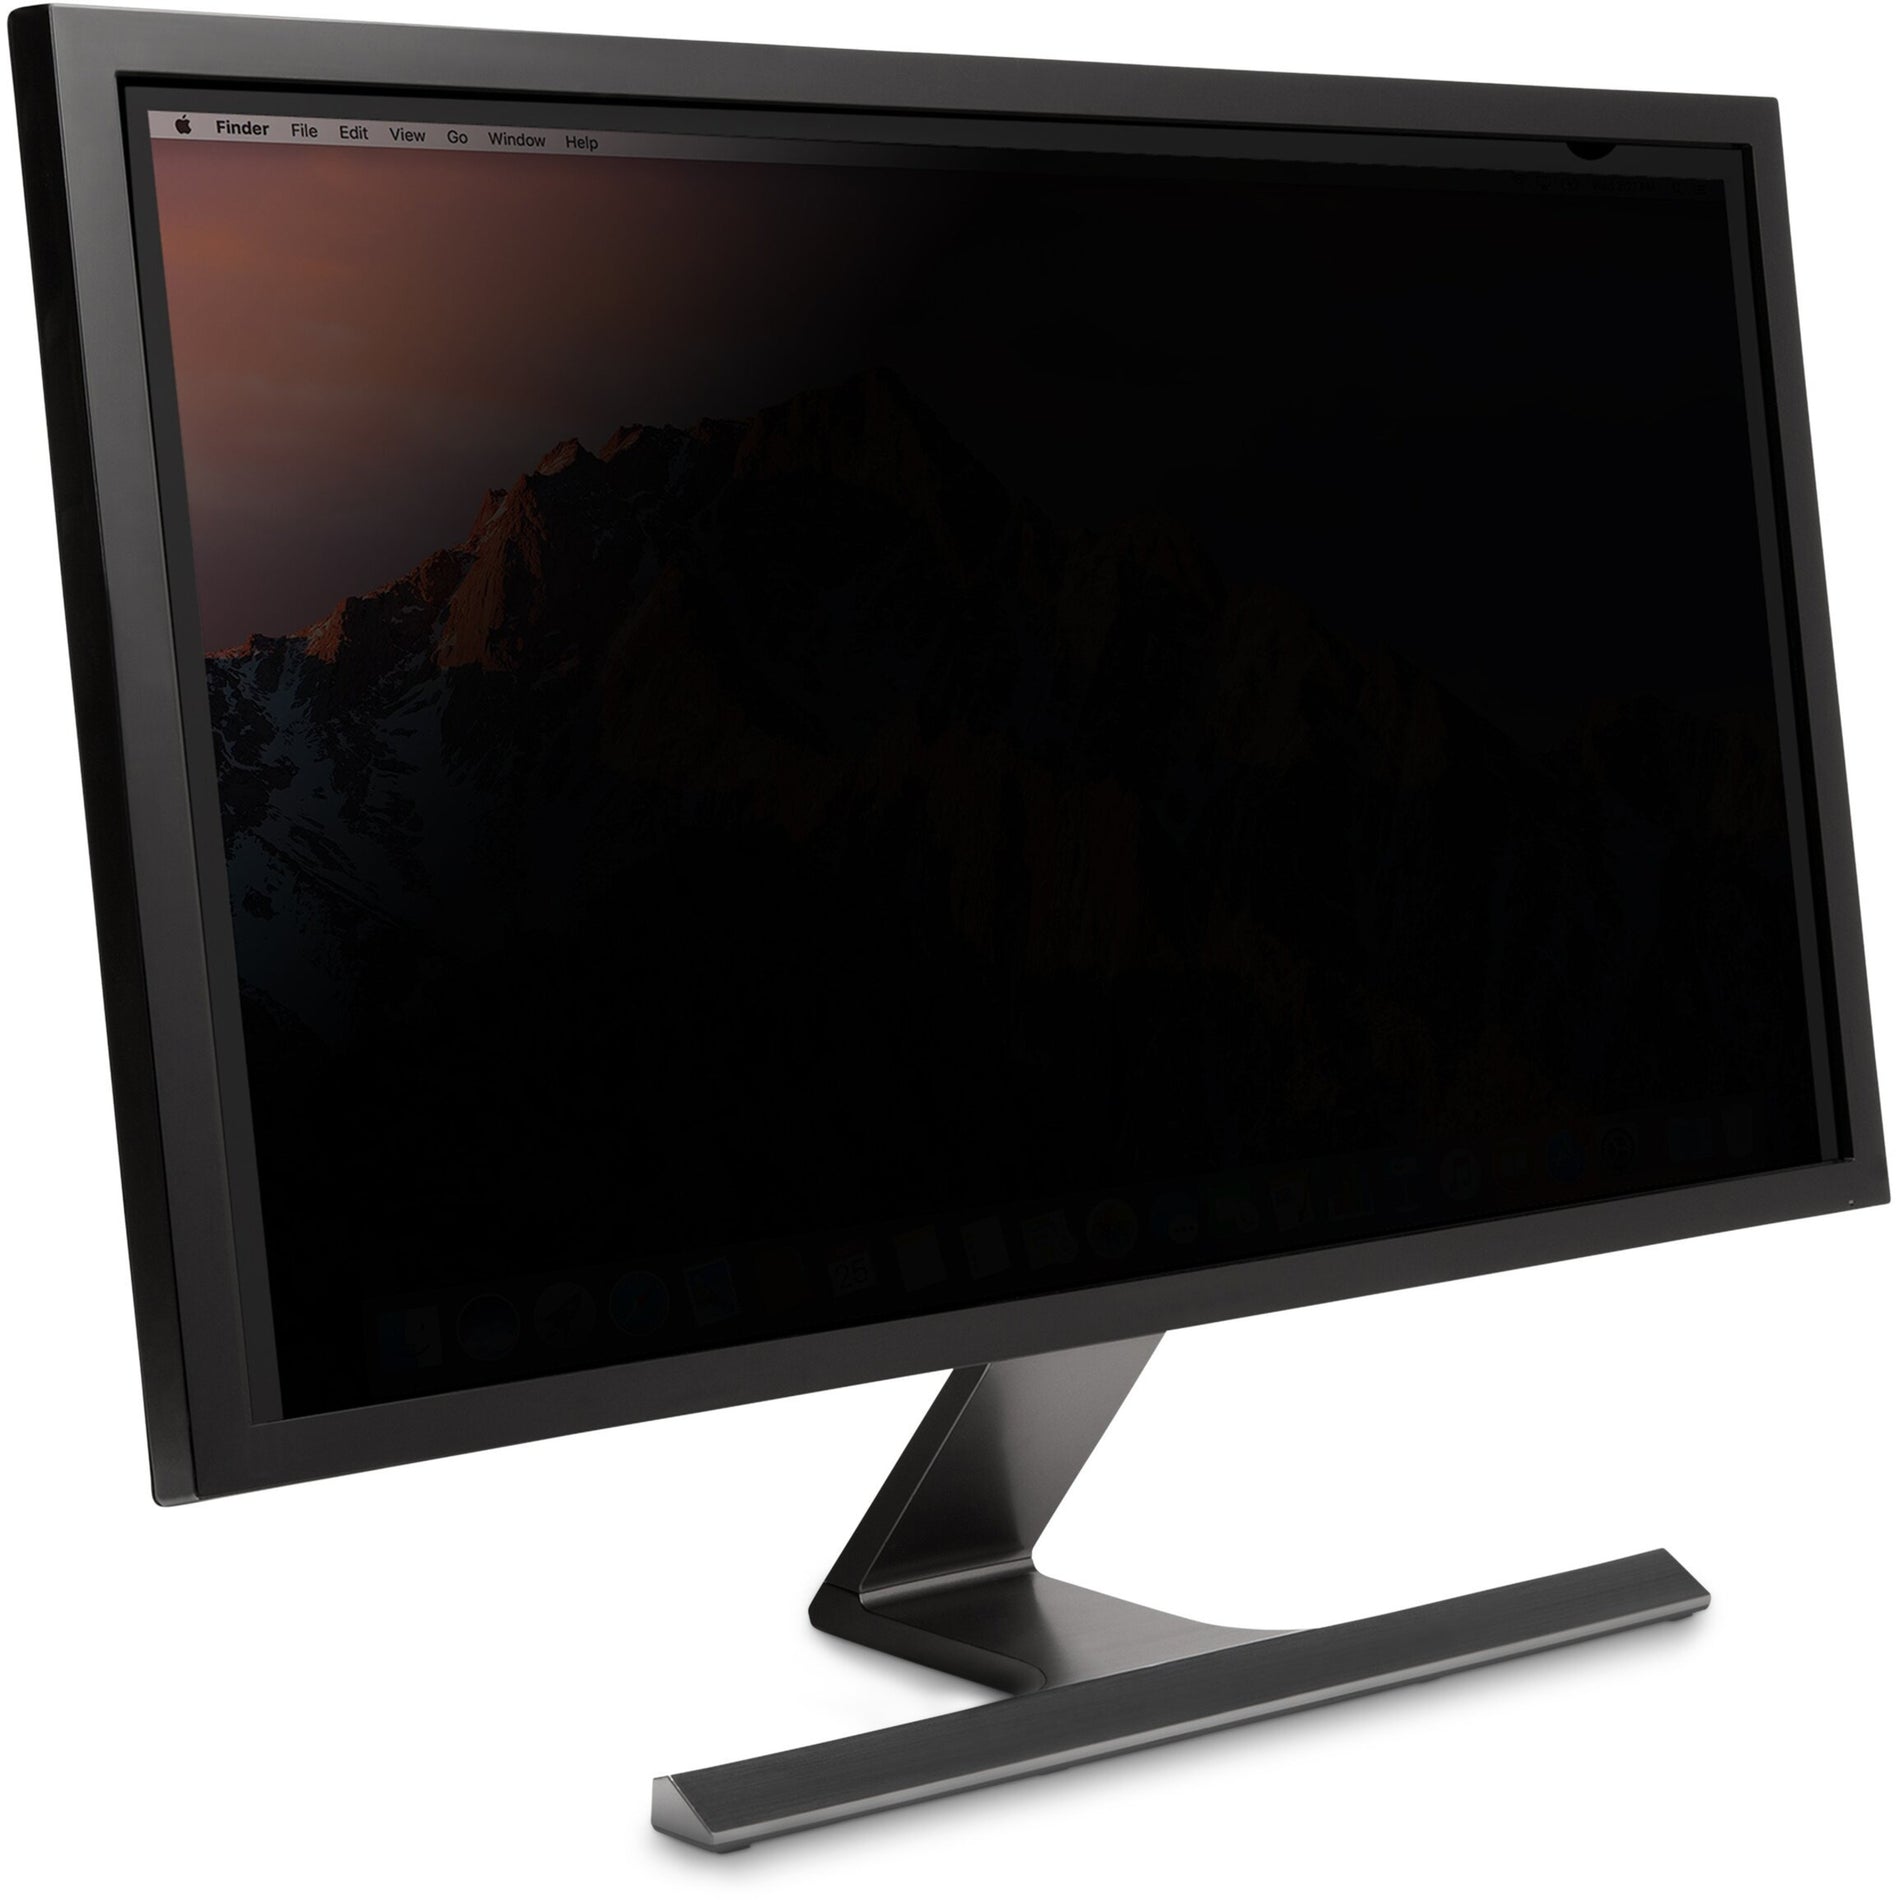 Kensington K52123WW FP300W10 Privacy Screen for Monitors (30" 16:10), Easy to Apply, Blue Light Reduction, Anti-glare